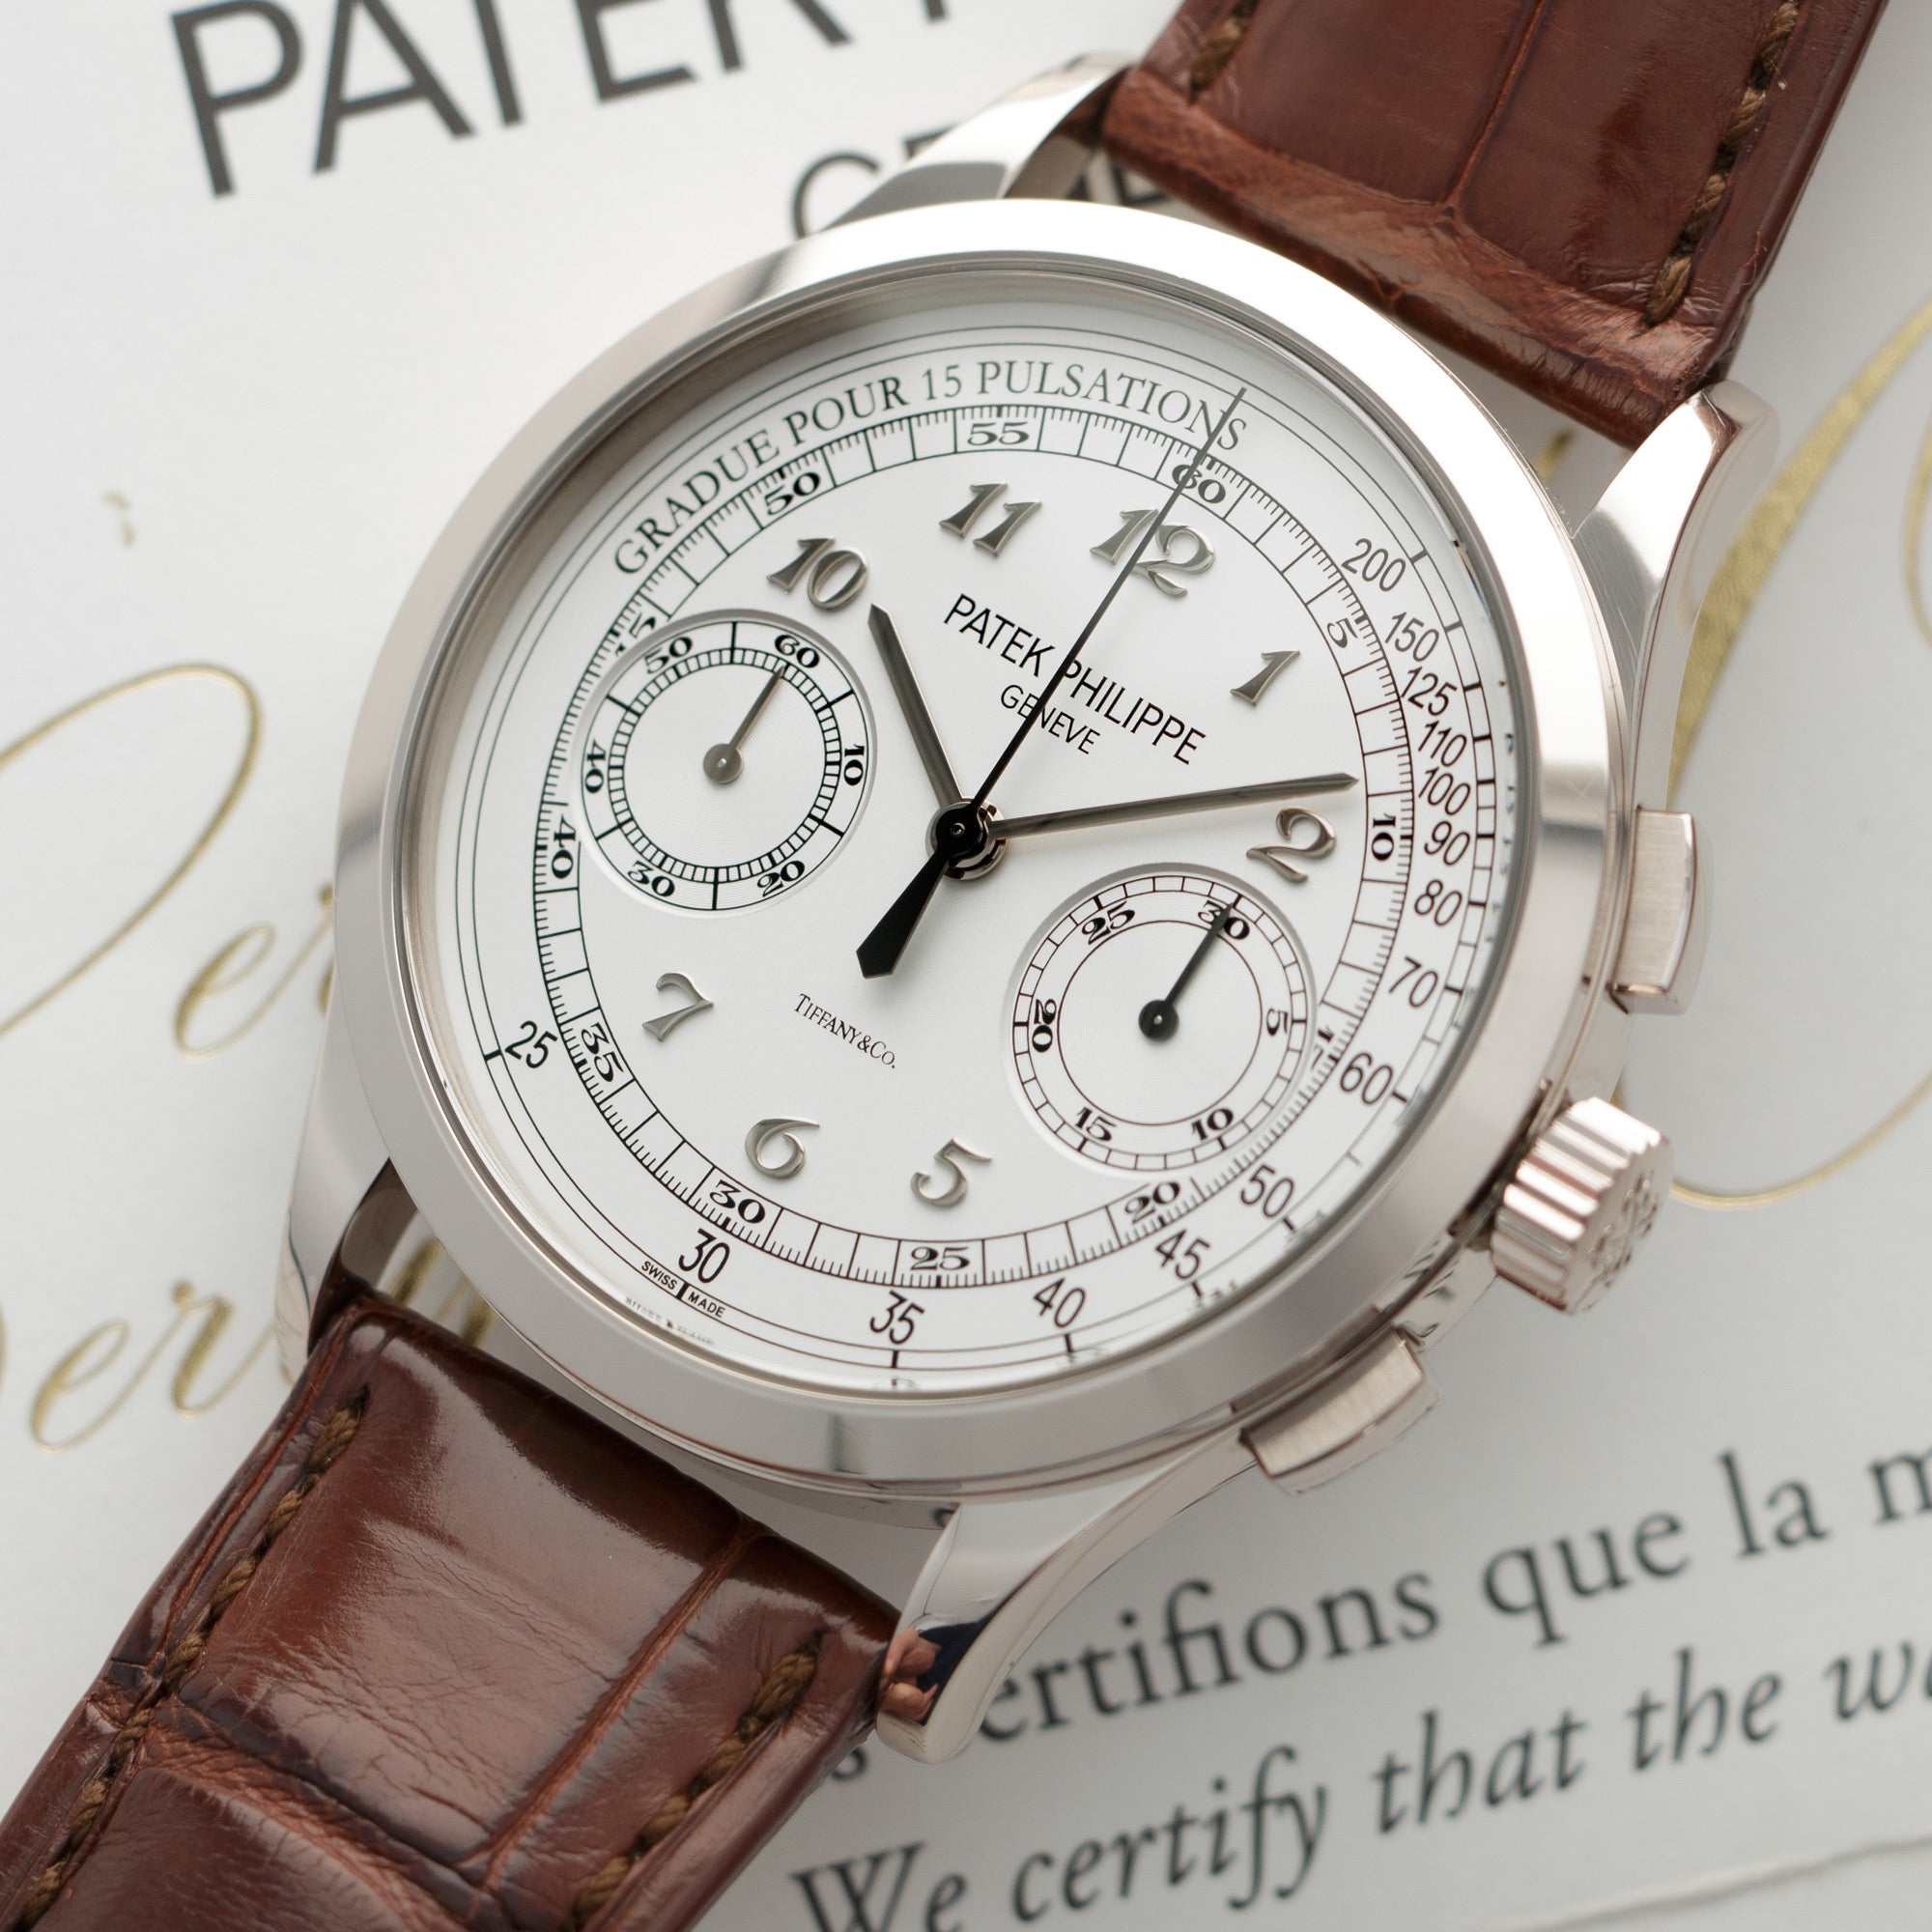 Patek Philippe - Patek Philippe White Gold Chronograph Ref. 5170, Retailed by Tiffany & Co. - The Keystone Watches